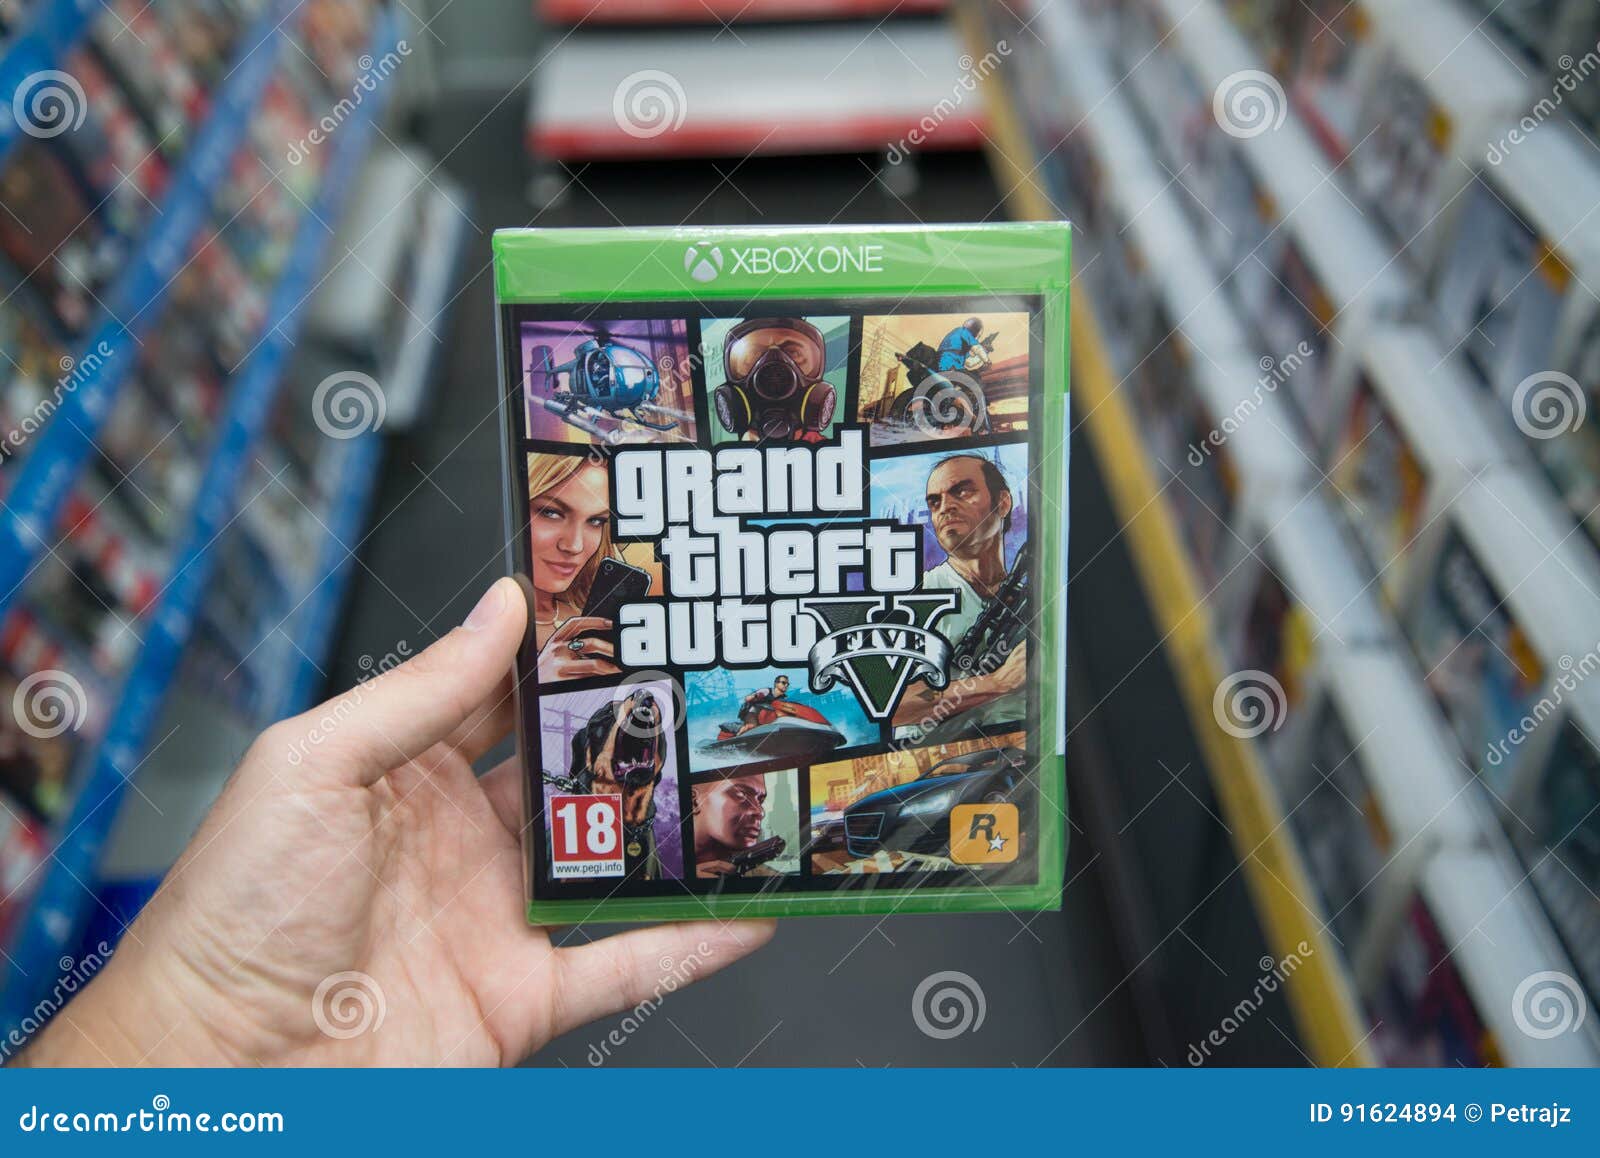 Grand Theft Auto 5 Videogame on XBOX One Editorial Stock Image - Image of  microsoft, grand: 91624894